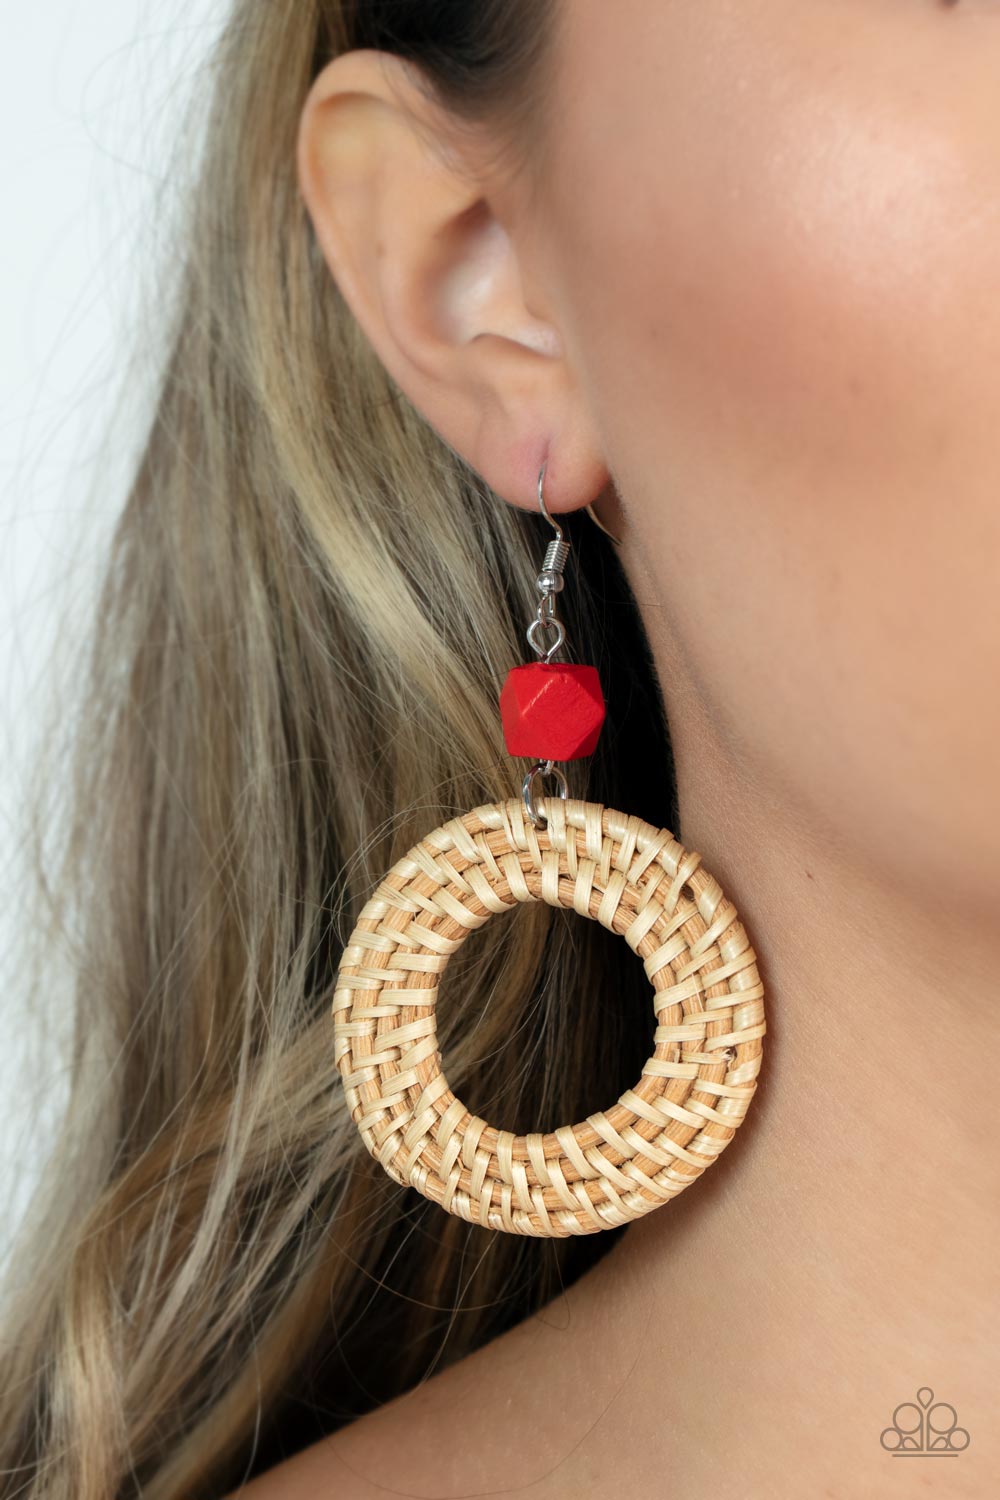 Paparazzi Accessories - Wildly Wicker - Red Earrings a wicker-like hoop swings from the bottom of a faceted red wooden bead, adding an earthy twist to the trendy homespun trinket. Earring attaches to a standard fishhook fitting.  Featured inside The Preview at GLOW! Sold as one pair of earrings.